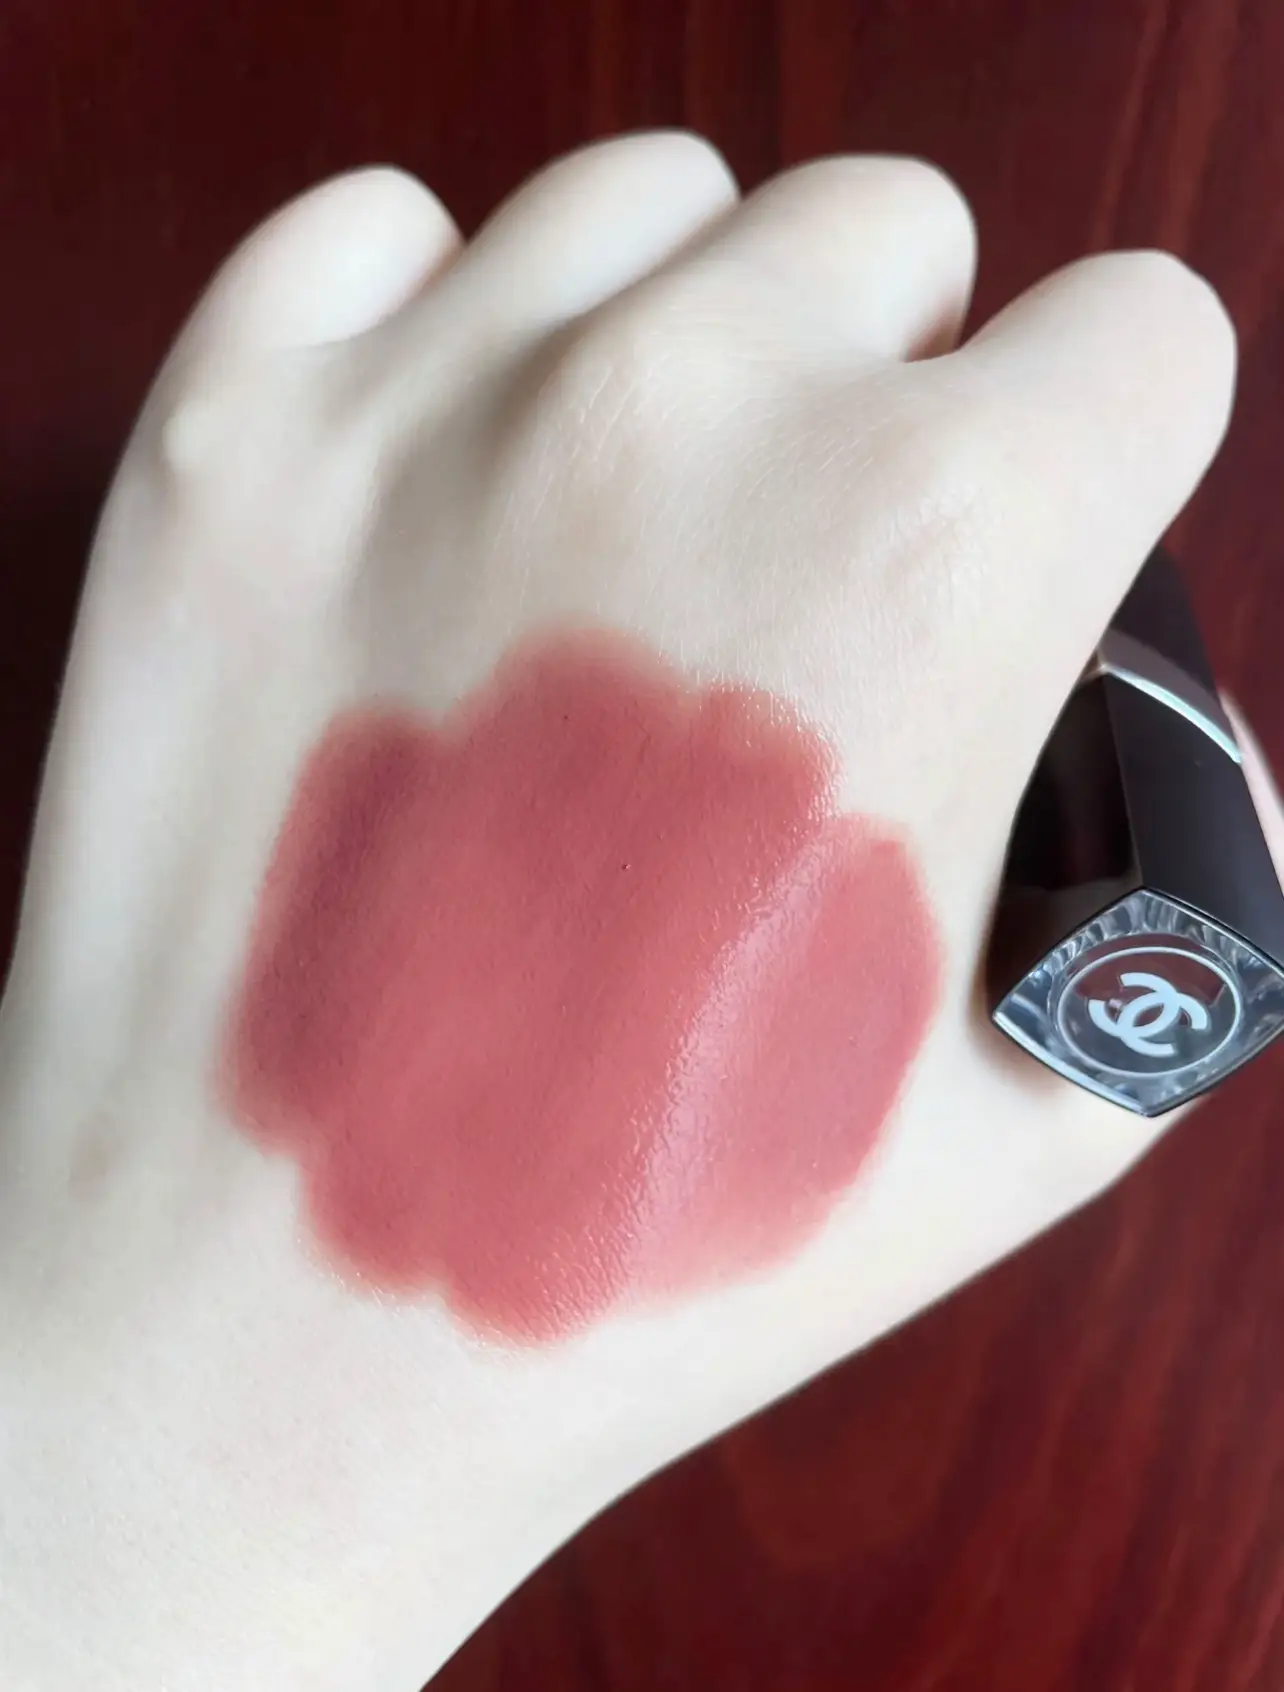 Chanel Rouge Coco Bloom Lipstick Review, Mole Pink, Pretty Natural